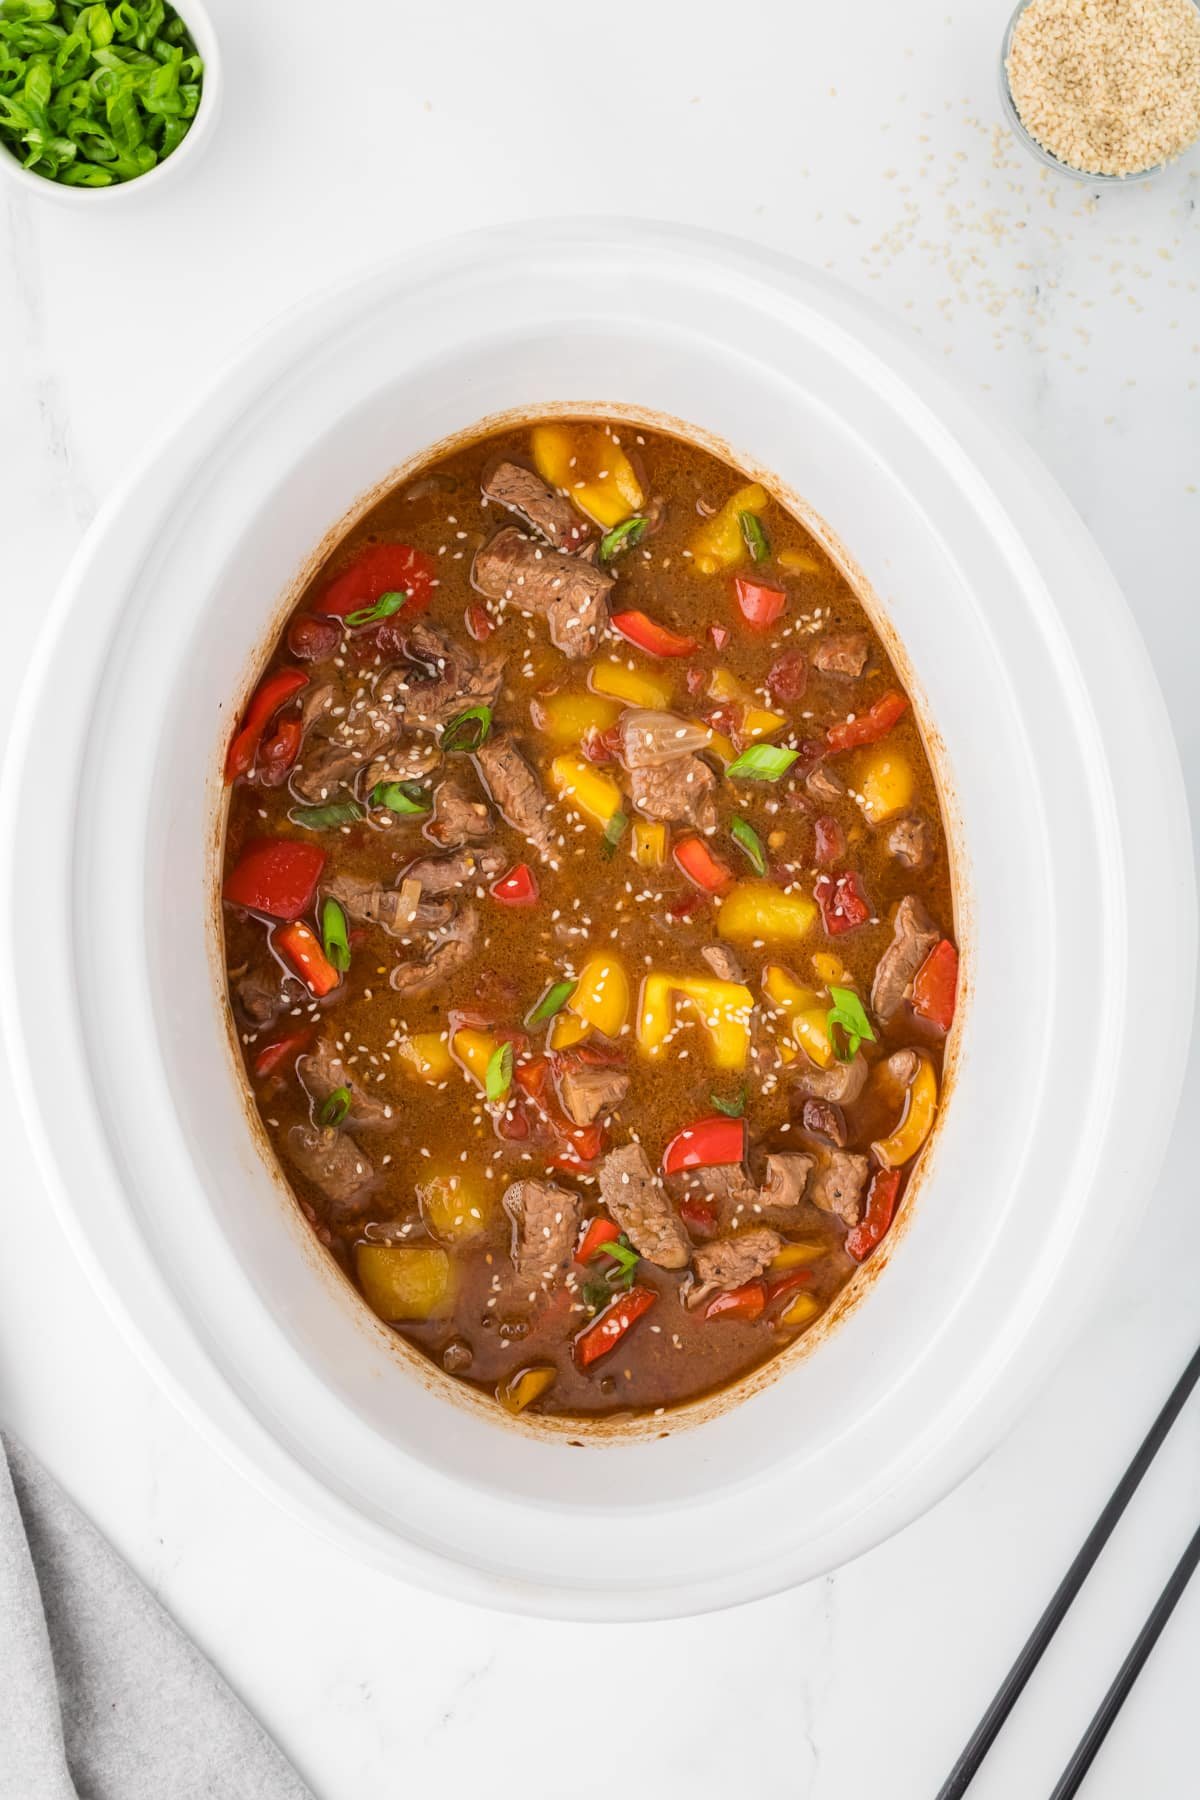 A slow cooker filled with a saucy pepper steak and garnished with sesame seeds.